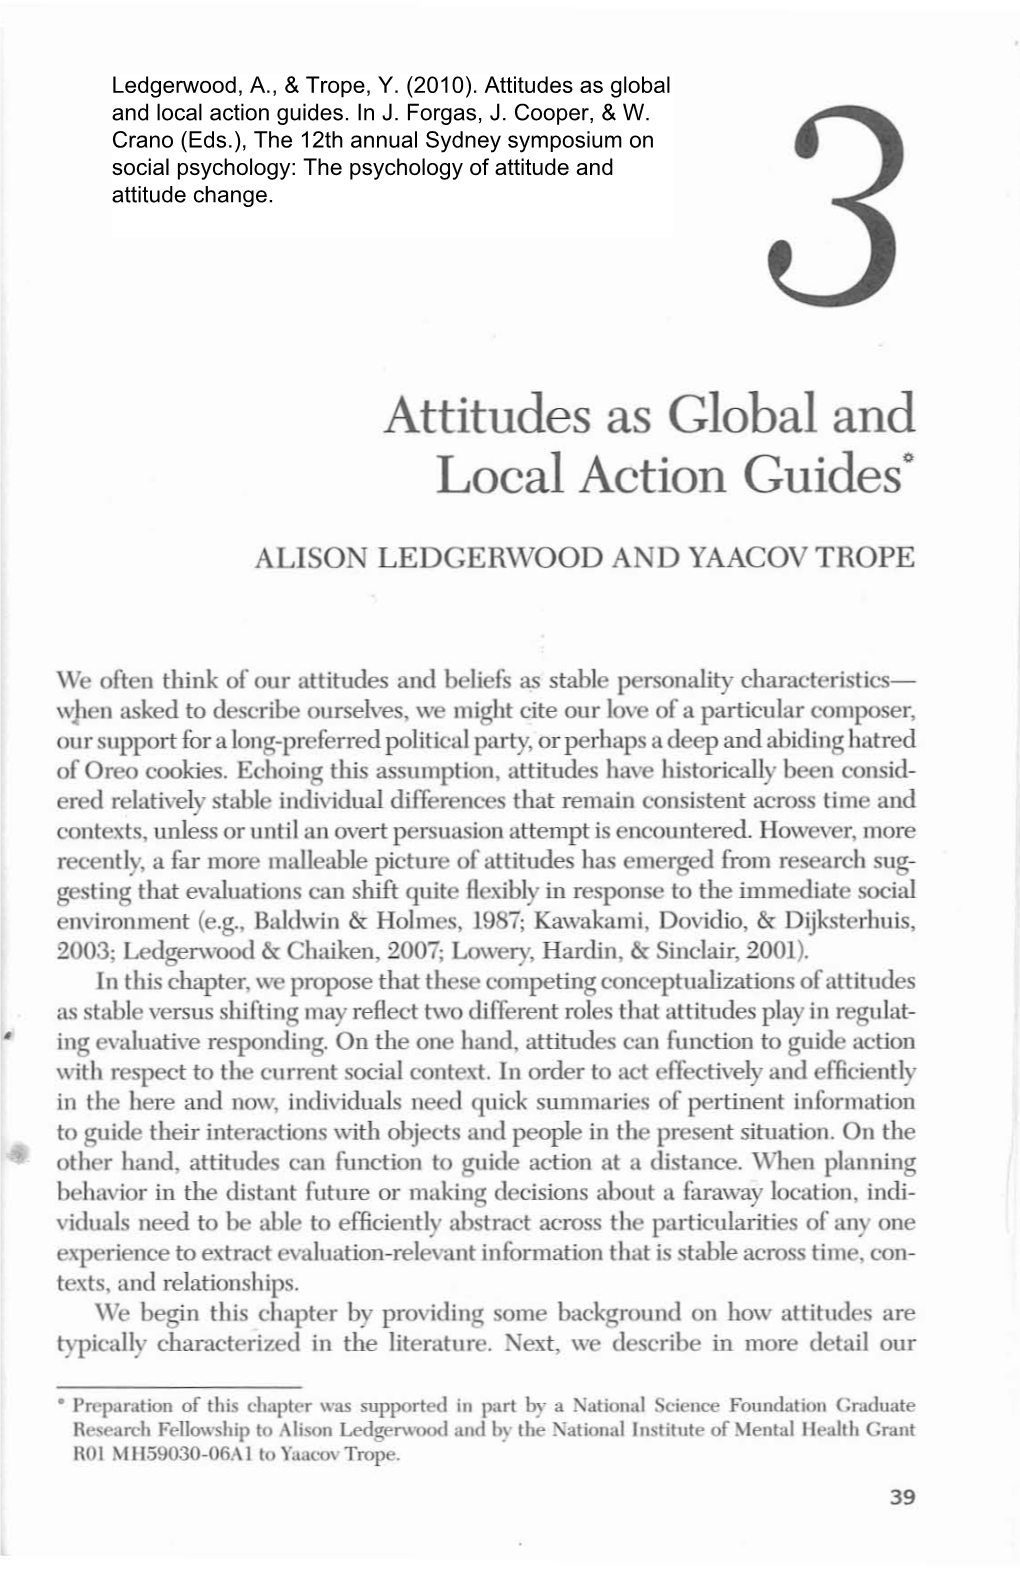 Attitudes As Global and Local Action Guides0